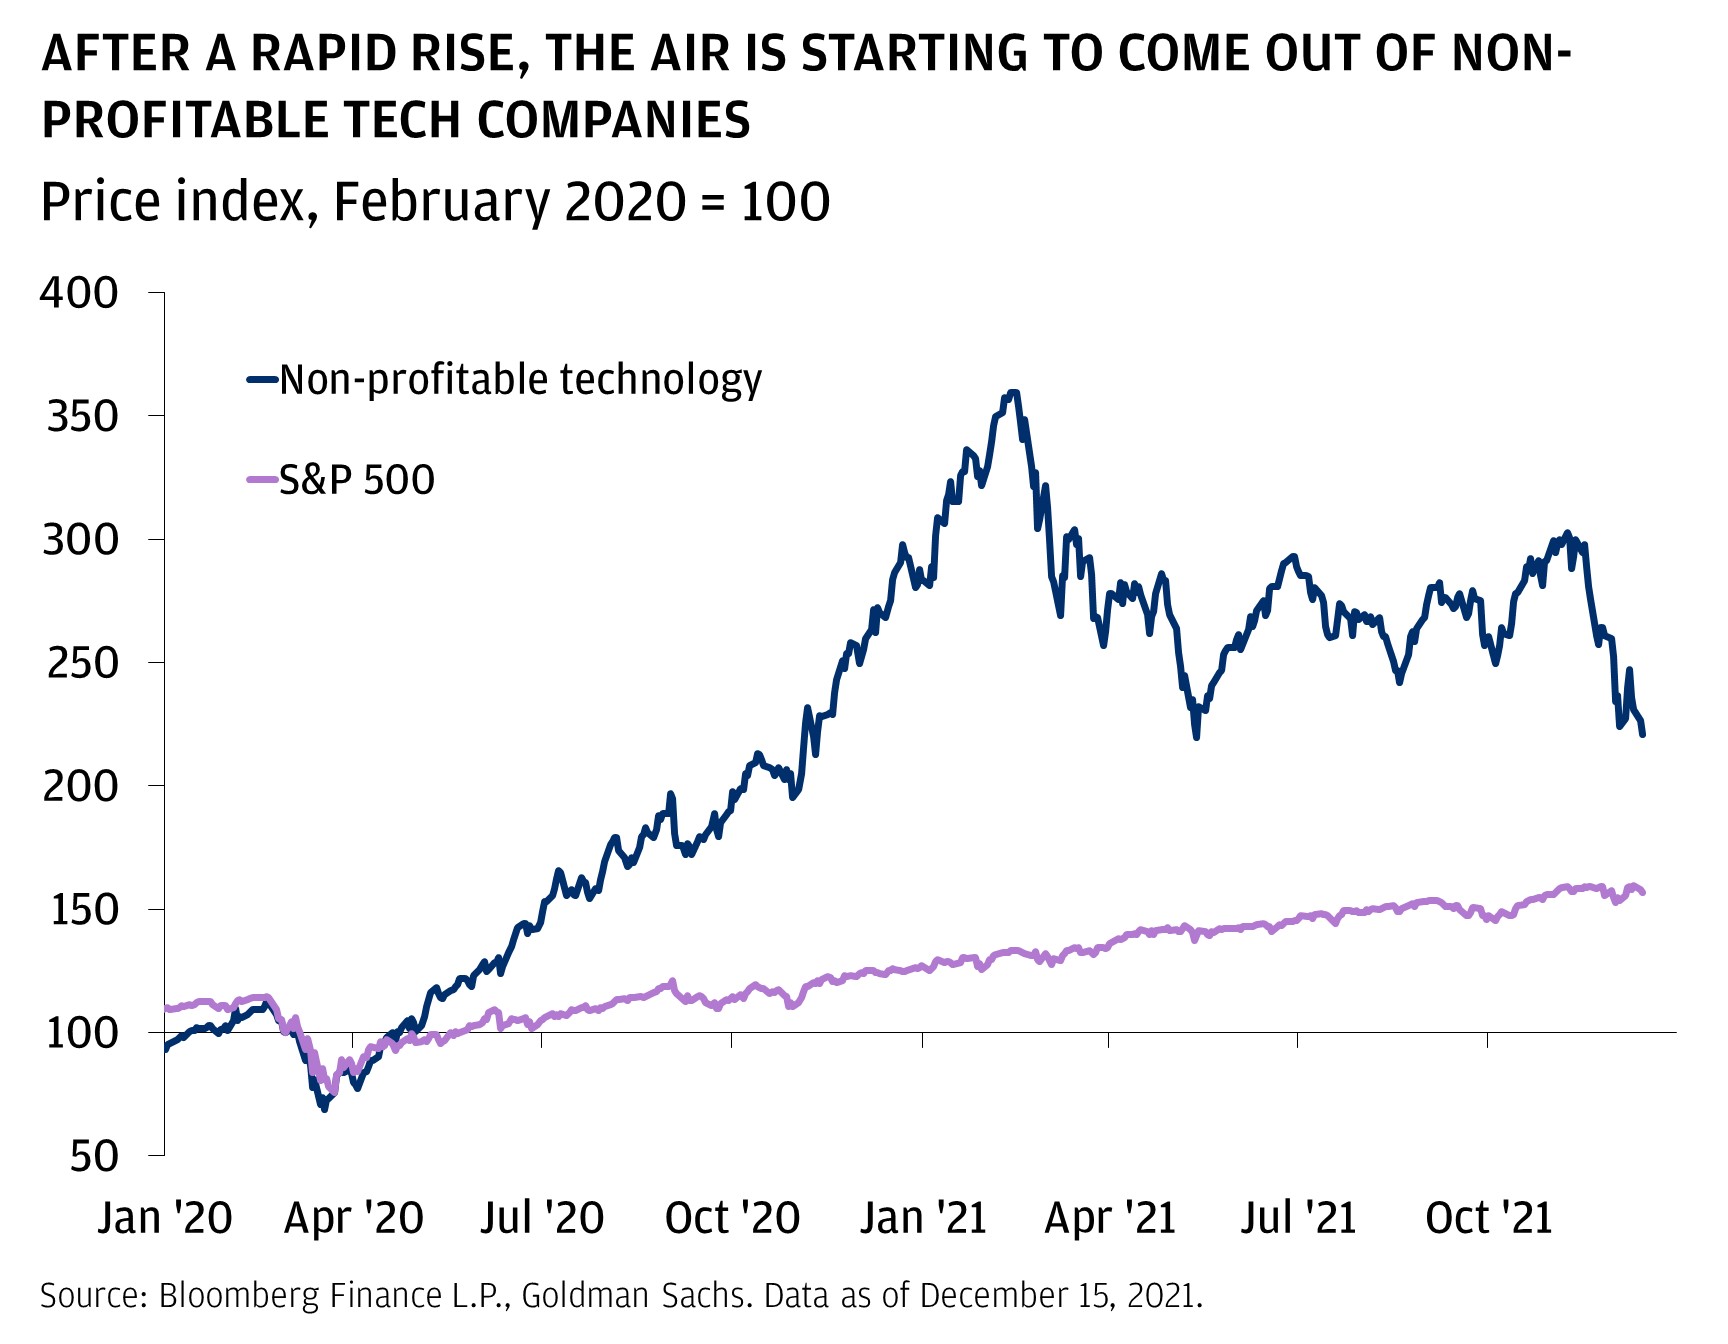 After a rapid rise, the air is starting to come out of non-profitable tech companies